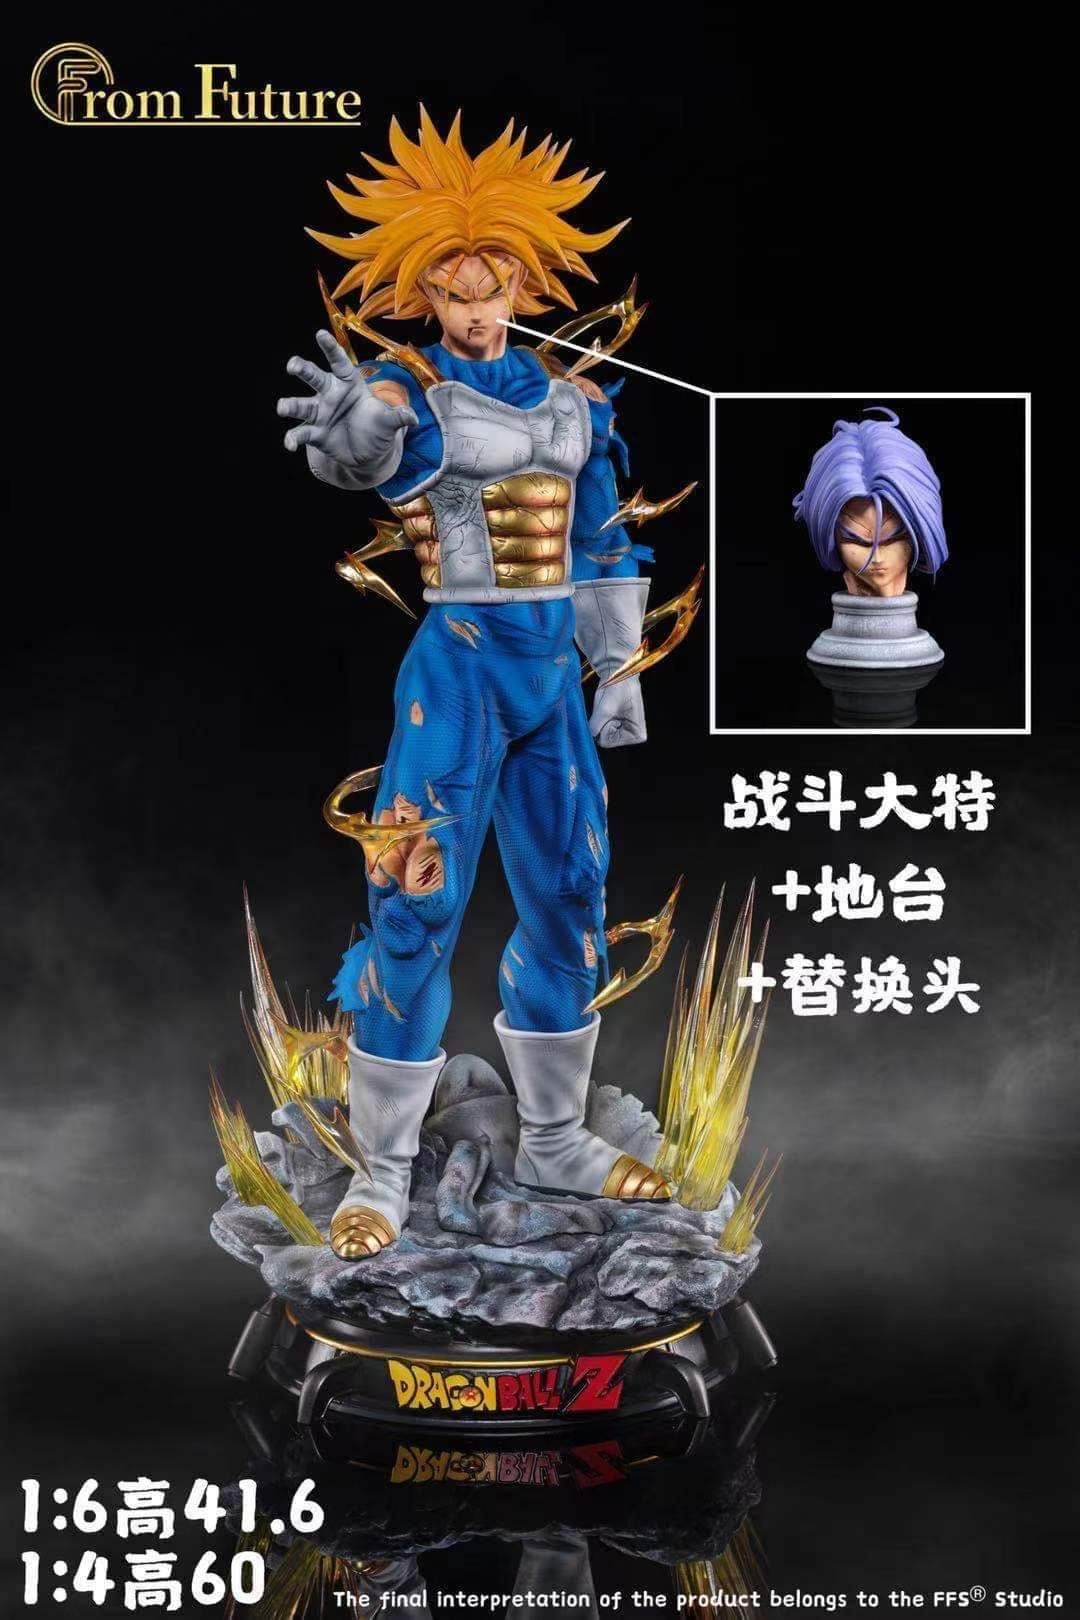 From Future - Trunks StatueCorp